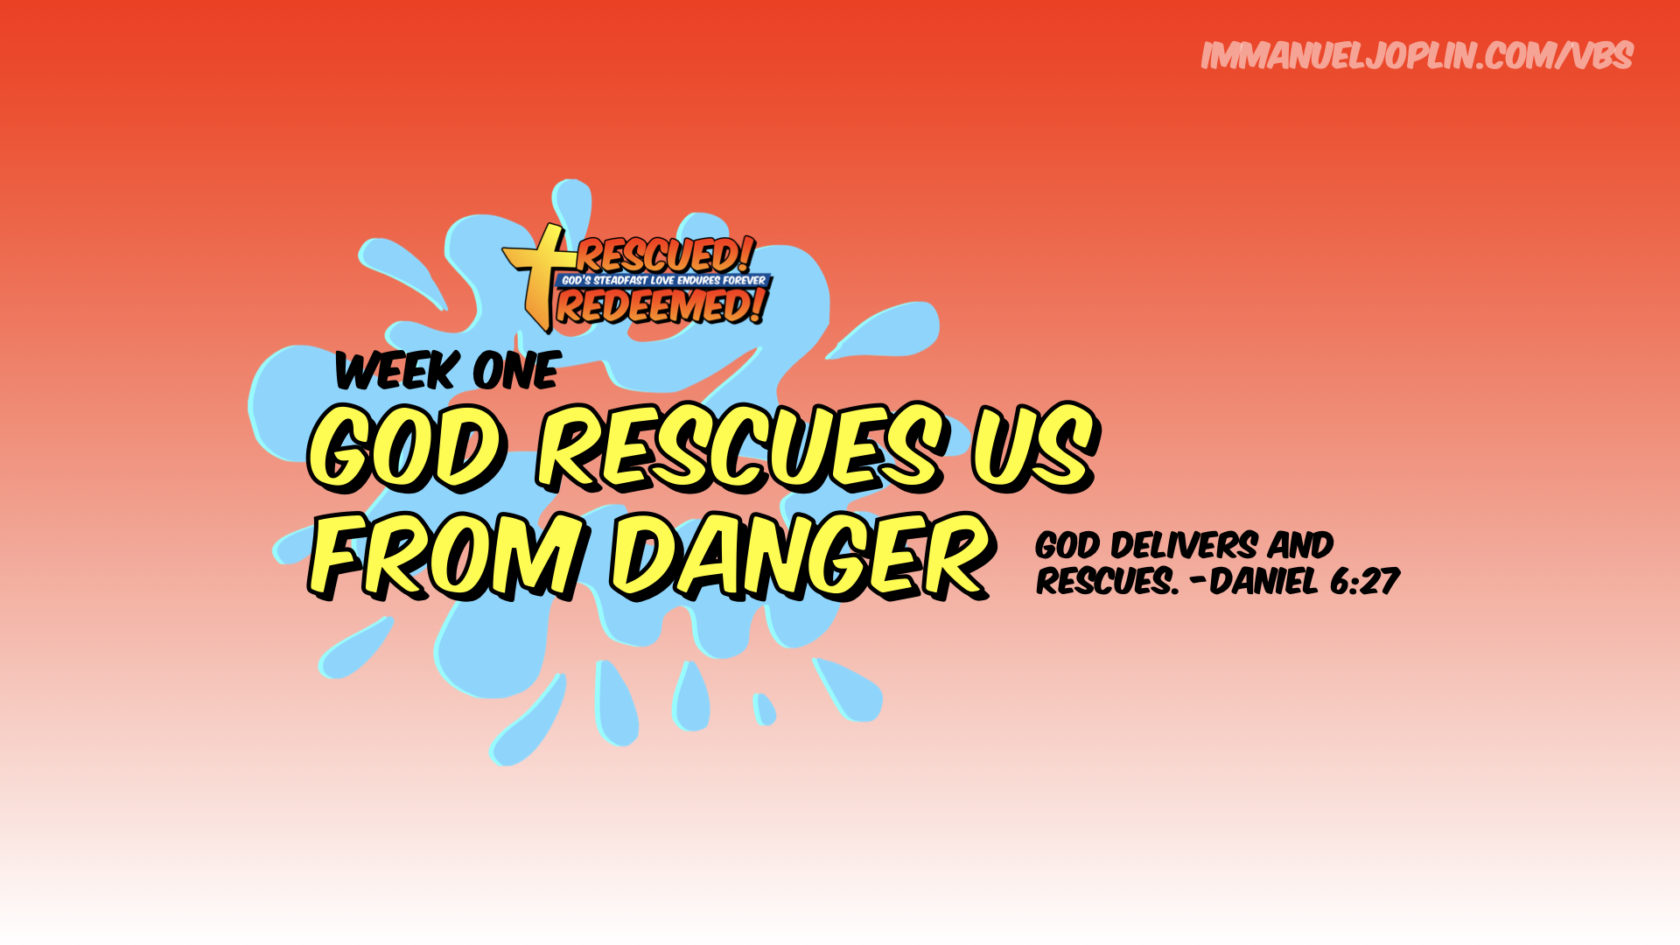 God Rescues Us From Danger VBS At Home Week One